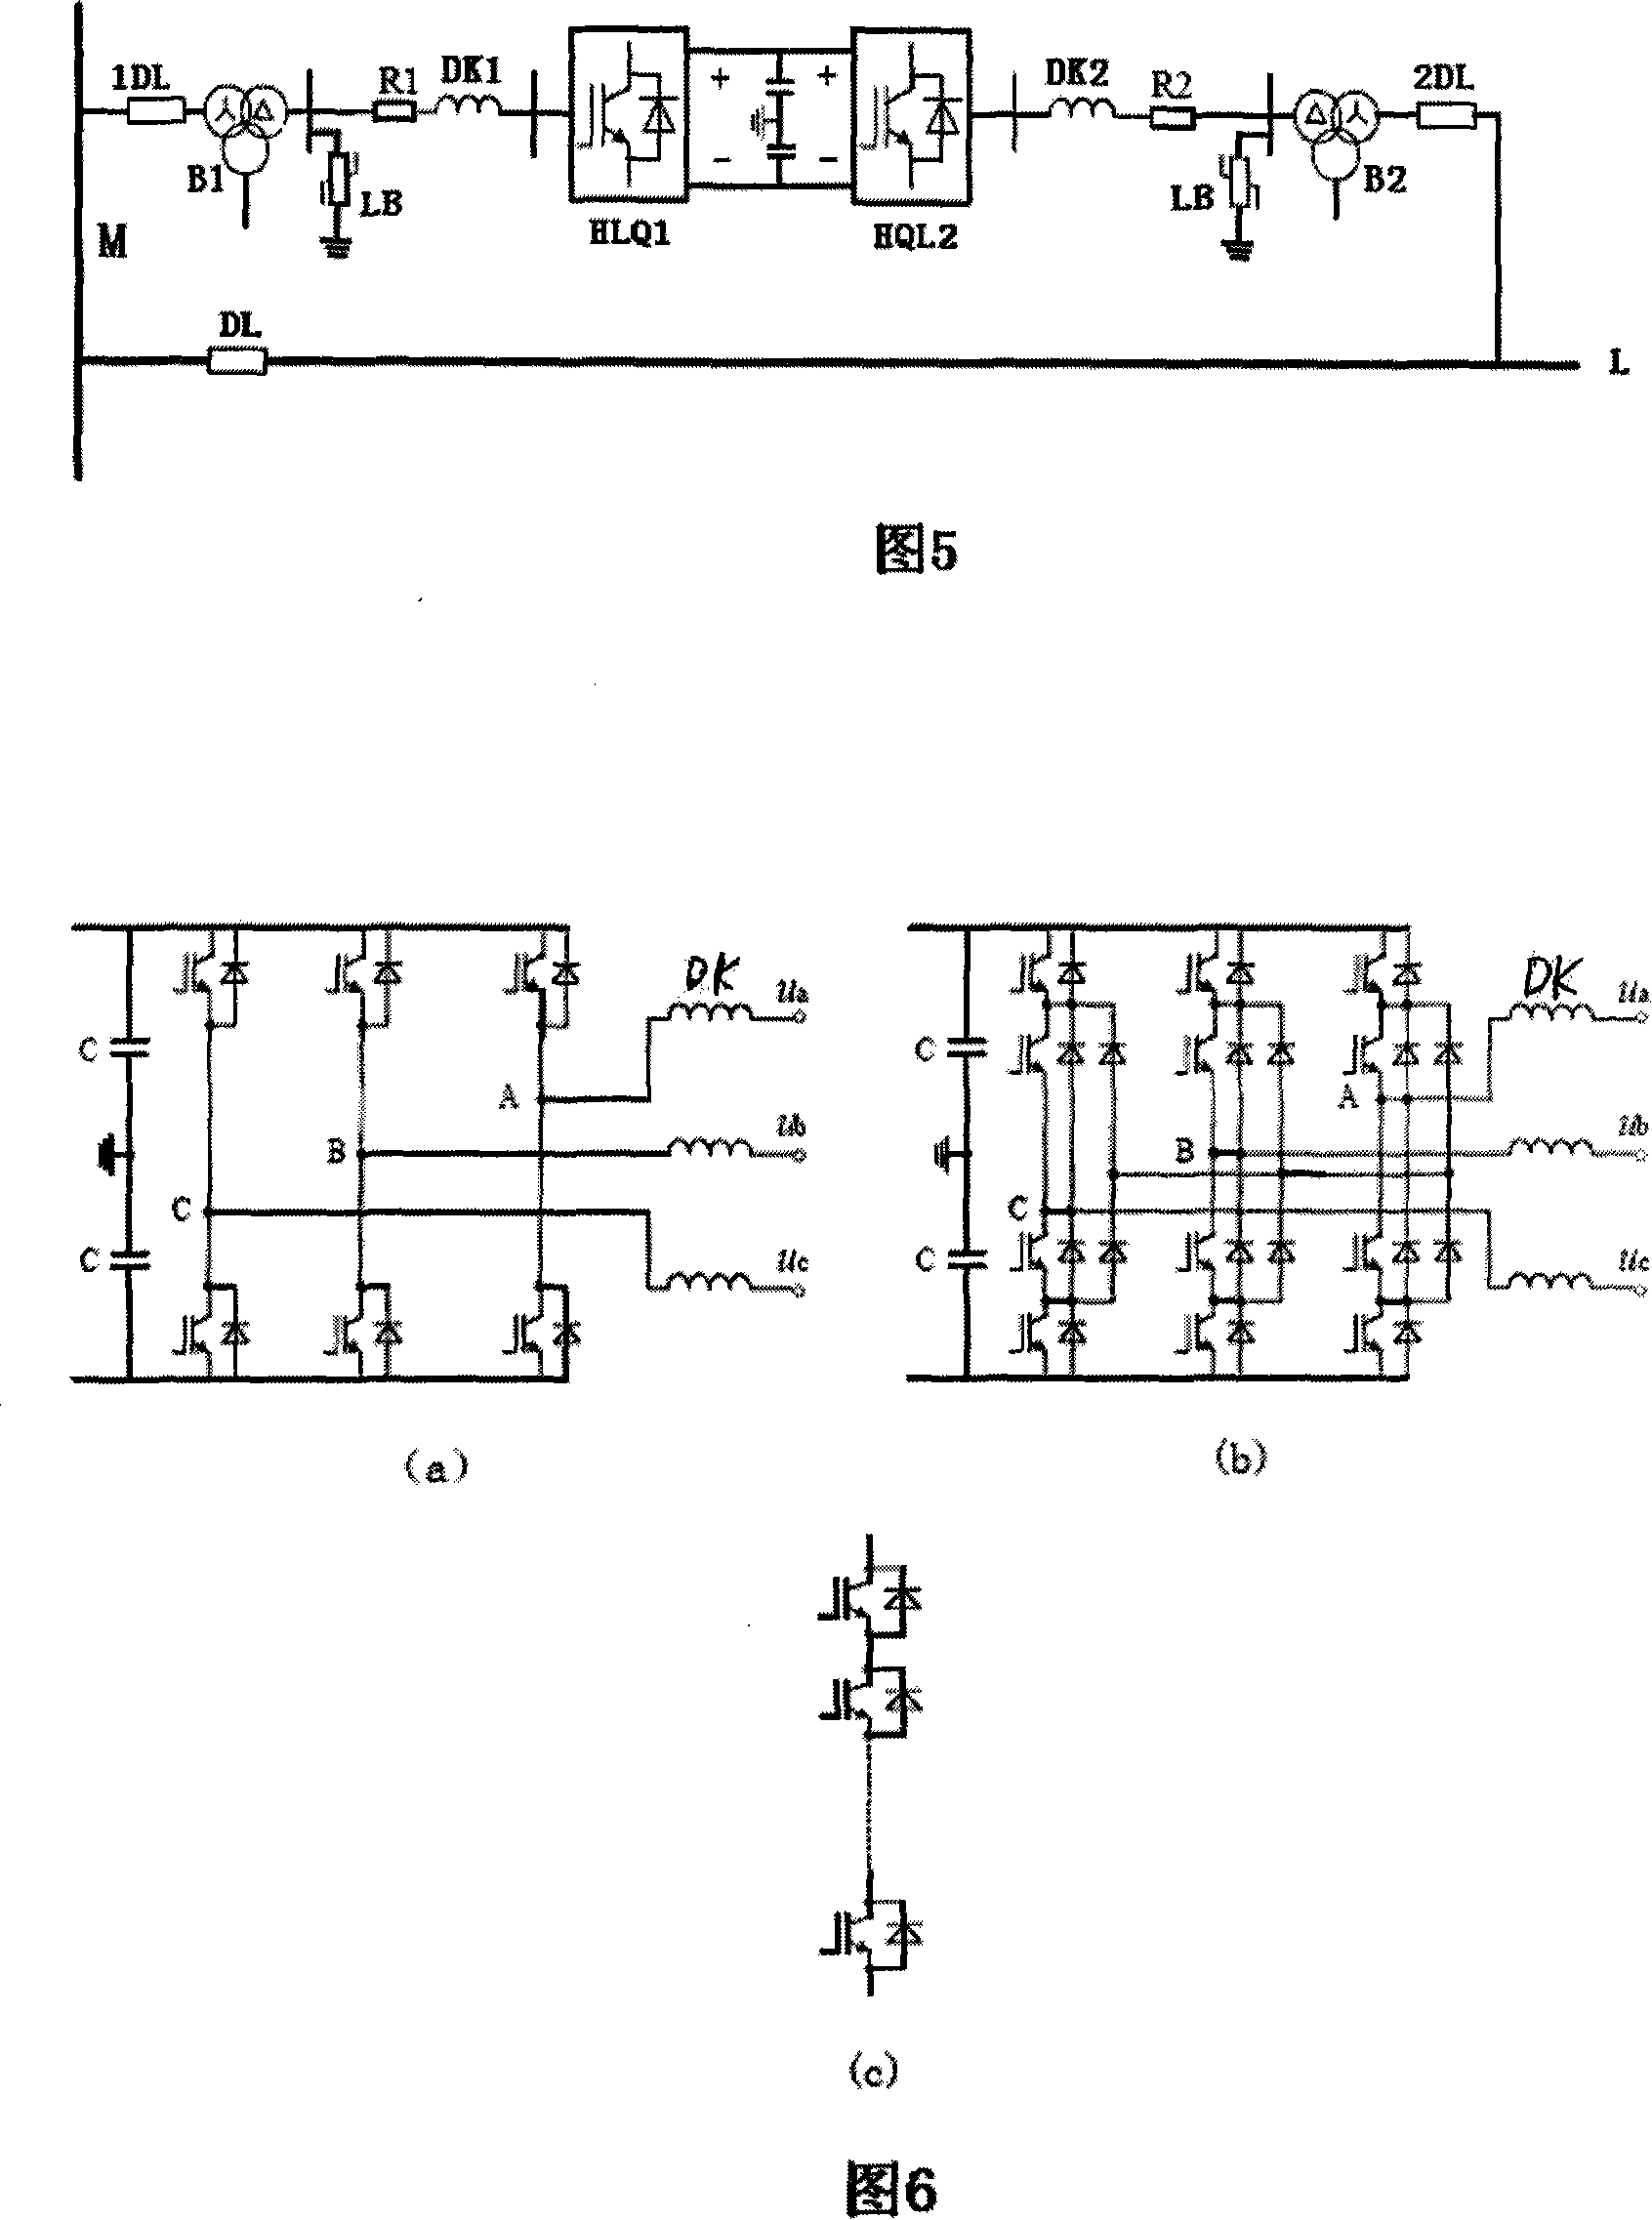 Quick-speed synchronization parallelly-arranged system between electric networks and method of use thereof